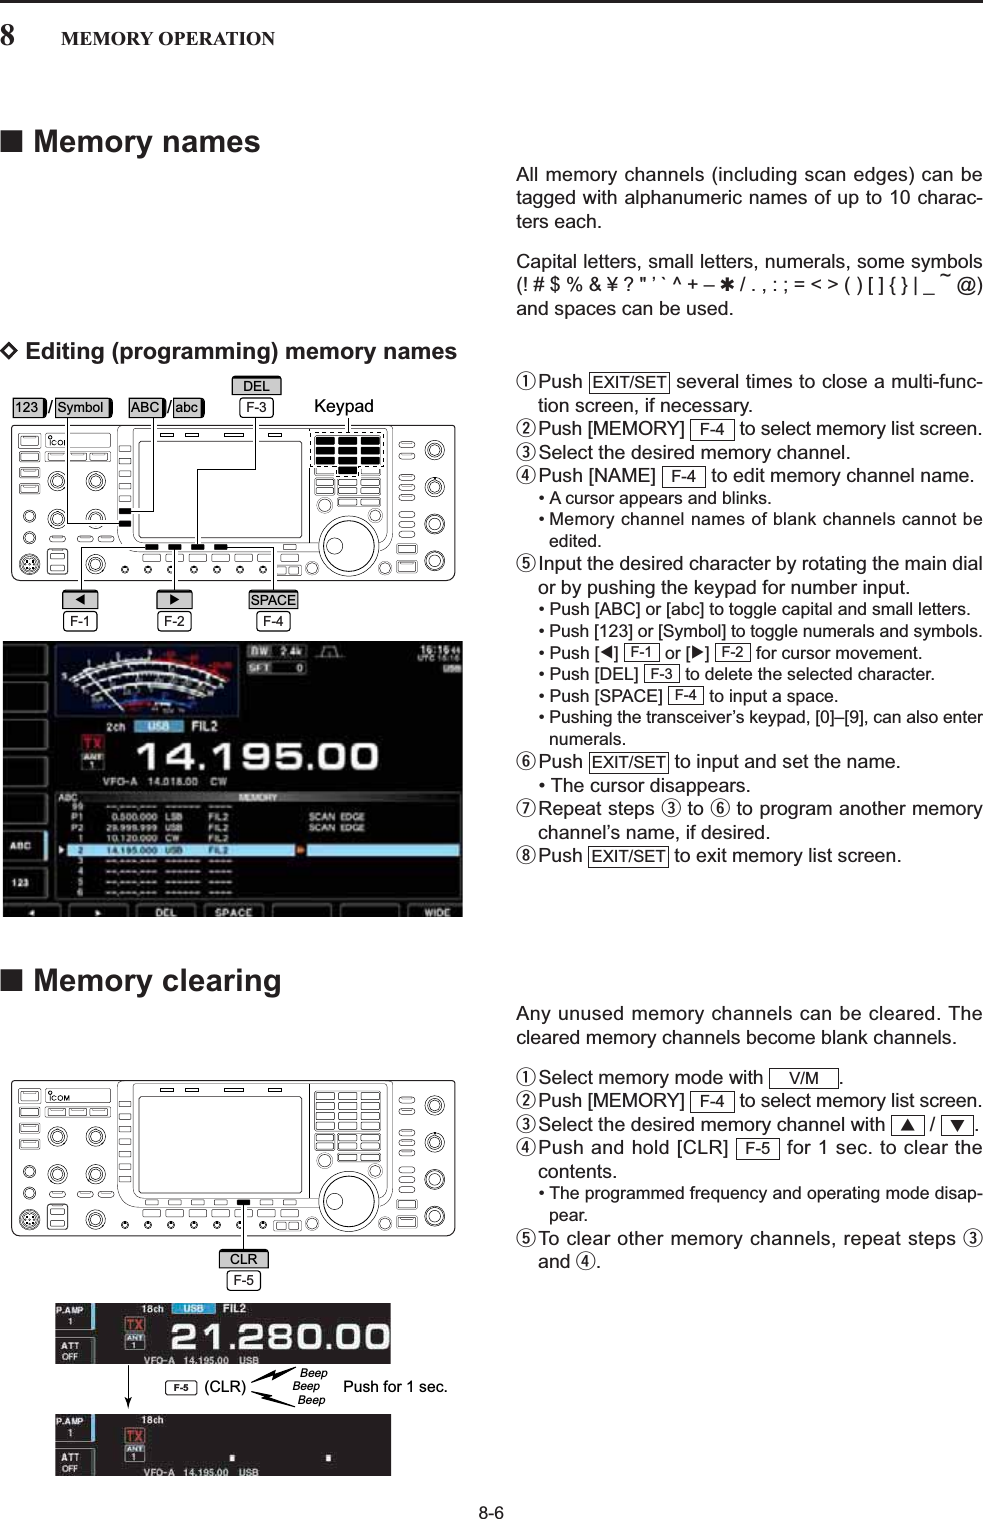 8-68MEMORY OPERATION■Memory namesAll memory channels (including scan edges) can betagged with alphanumeric names of up to 10 charac-ters each.Capital letters, small letters, numerals, some symbols(! # $ % &amp; ¥ ? &quot; ’ ` ^ + – ✱/ . , : ; = &lt; &gt; ( ) [ ] { } | _ ~@)and spaces can be used.DEditing (programming) memory namesqPush  several times to close a multi-func-tion screen, if necessary.wPush [MEMORY]  to select memory list screen.eSelect the desired memory channel.rPush [NAME]  to edit memory channel name.• A cursor appears and blinks.• Memory channel names of blank channels cannot beedited.tInput the desired character by rotating the main dialor by pushing the keypad for number input.• Push [ABC] or [abc] to toggle capital and small letters.• Push [123] or [Symbol] to toggle numerals and symbols.• Push [Ω] or [≈]  for cursor movement.• Push [DEL]  to delete the selected character.• Push [SPACE]  to input a space.• Pushing the transceiver’s keypad, [0]–[9], can also enternumerals.yPush  to input and set the name.• The cursor disappears.uRepeat steps eto yto program another memorychannel’s name, if desired.iPush  to exit memory list screen.■Memory clearingAny unused memory channels can be cleared. Thecleared memory channels become blank channels.qSelect memory mode with  .wPush [MEMORY]  to select memory list screen.eSelect the desired memory channel with  /  .rPush and hold [CLR]  for 1 sec. to clear thecontents.• The programmed frequency and operating mode disap-pear.tTo clear other memory channels, repeat steps eand r.F-5√∫F-4V/MEXIT/SETEXIT/SETF-4F-3F-2F-1F-4F-4EXIT/SETPush for 1 sec.BeepBeepBeep(CLR)F-5F-5CLRKeypad//F-3DEL123 Symbol ABC abcF-1ΩF-2≈F-4SPACE